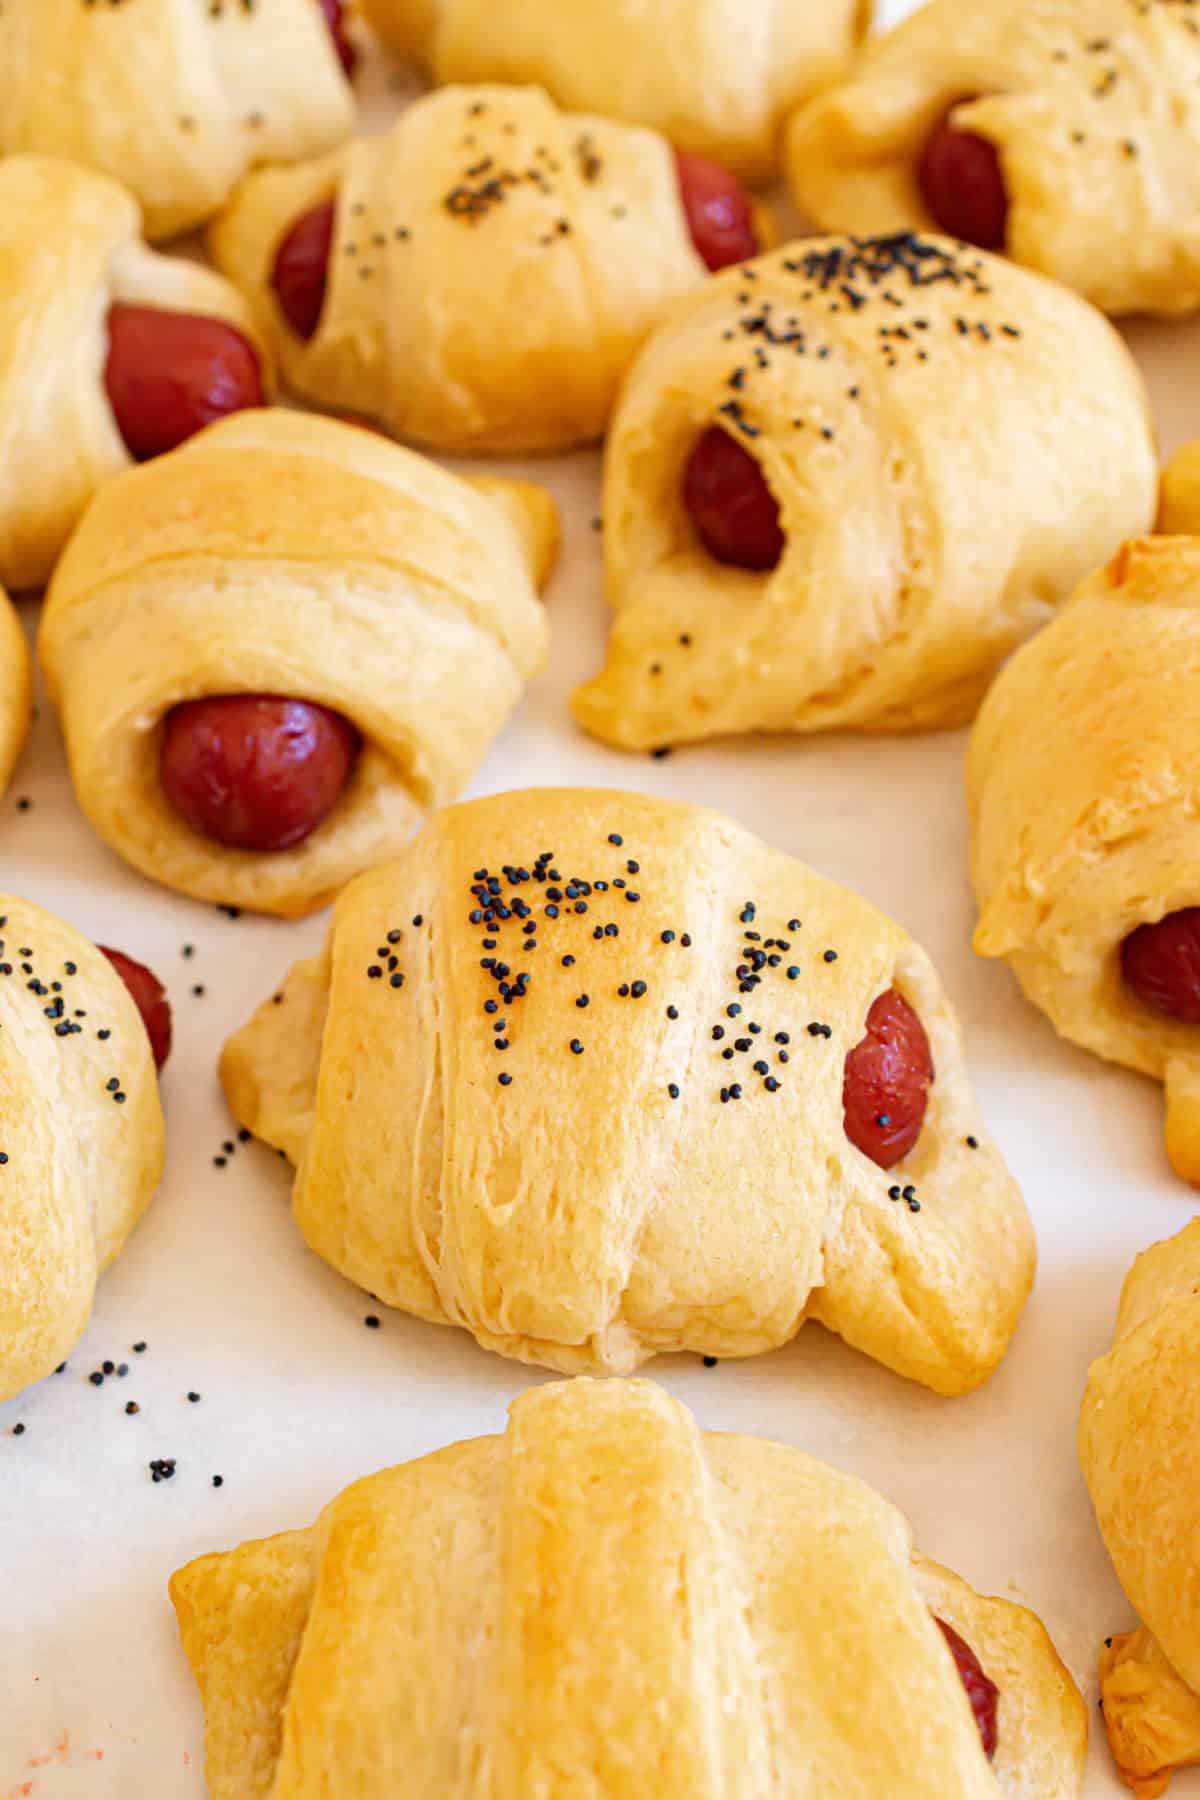 Crescent roll dogs baked and topped with poppy seeds.